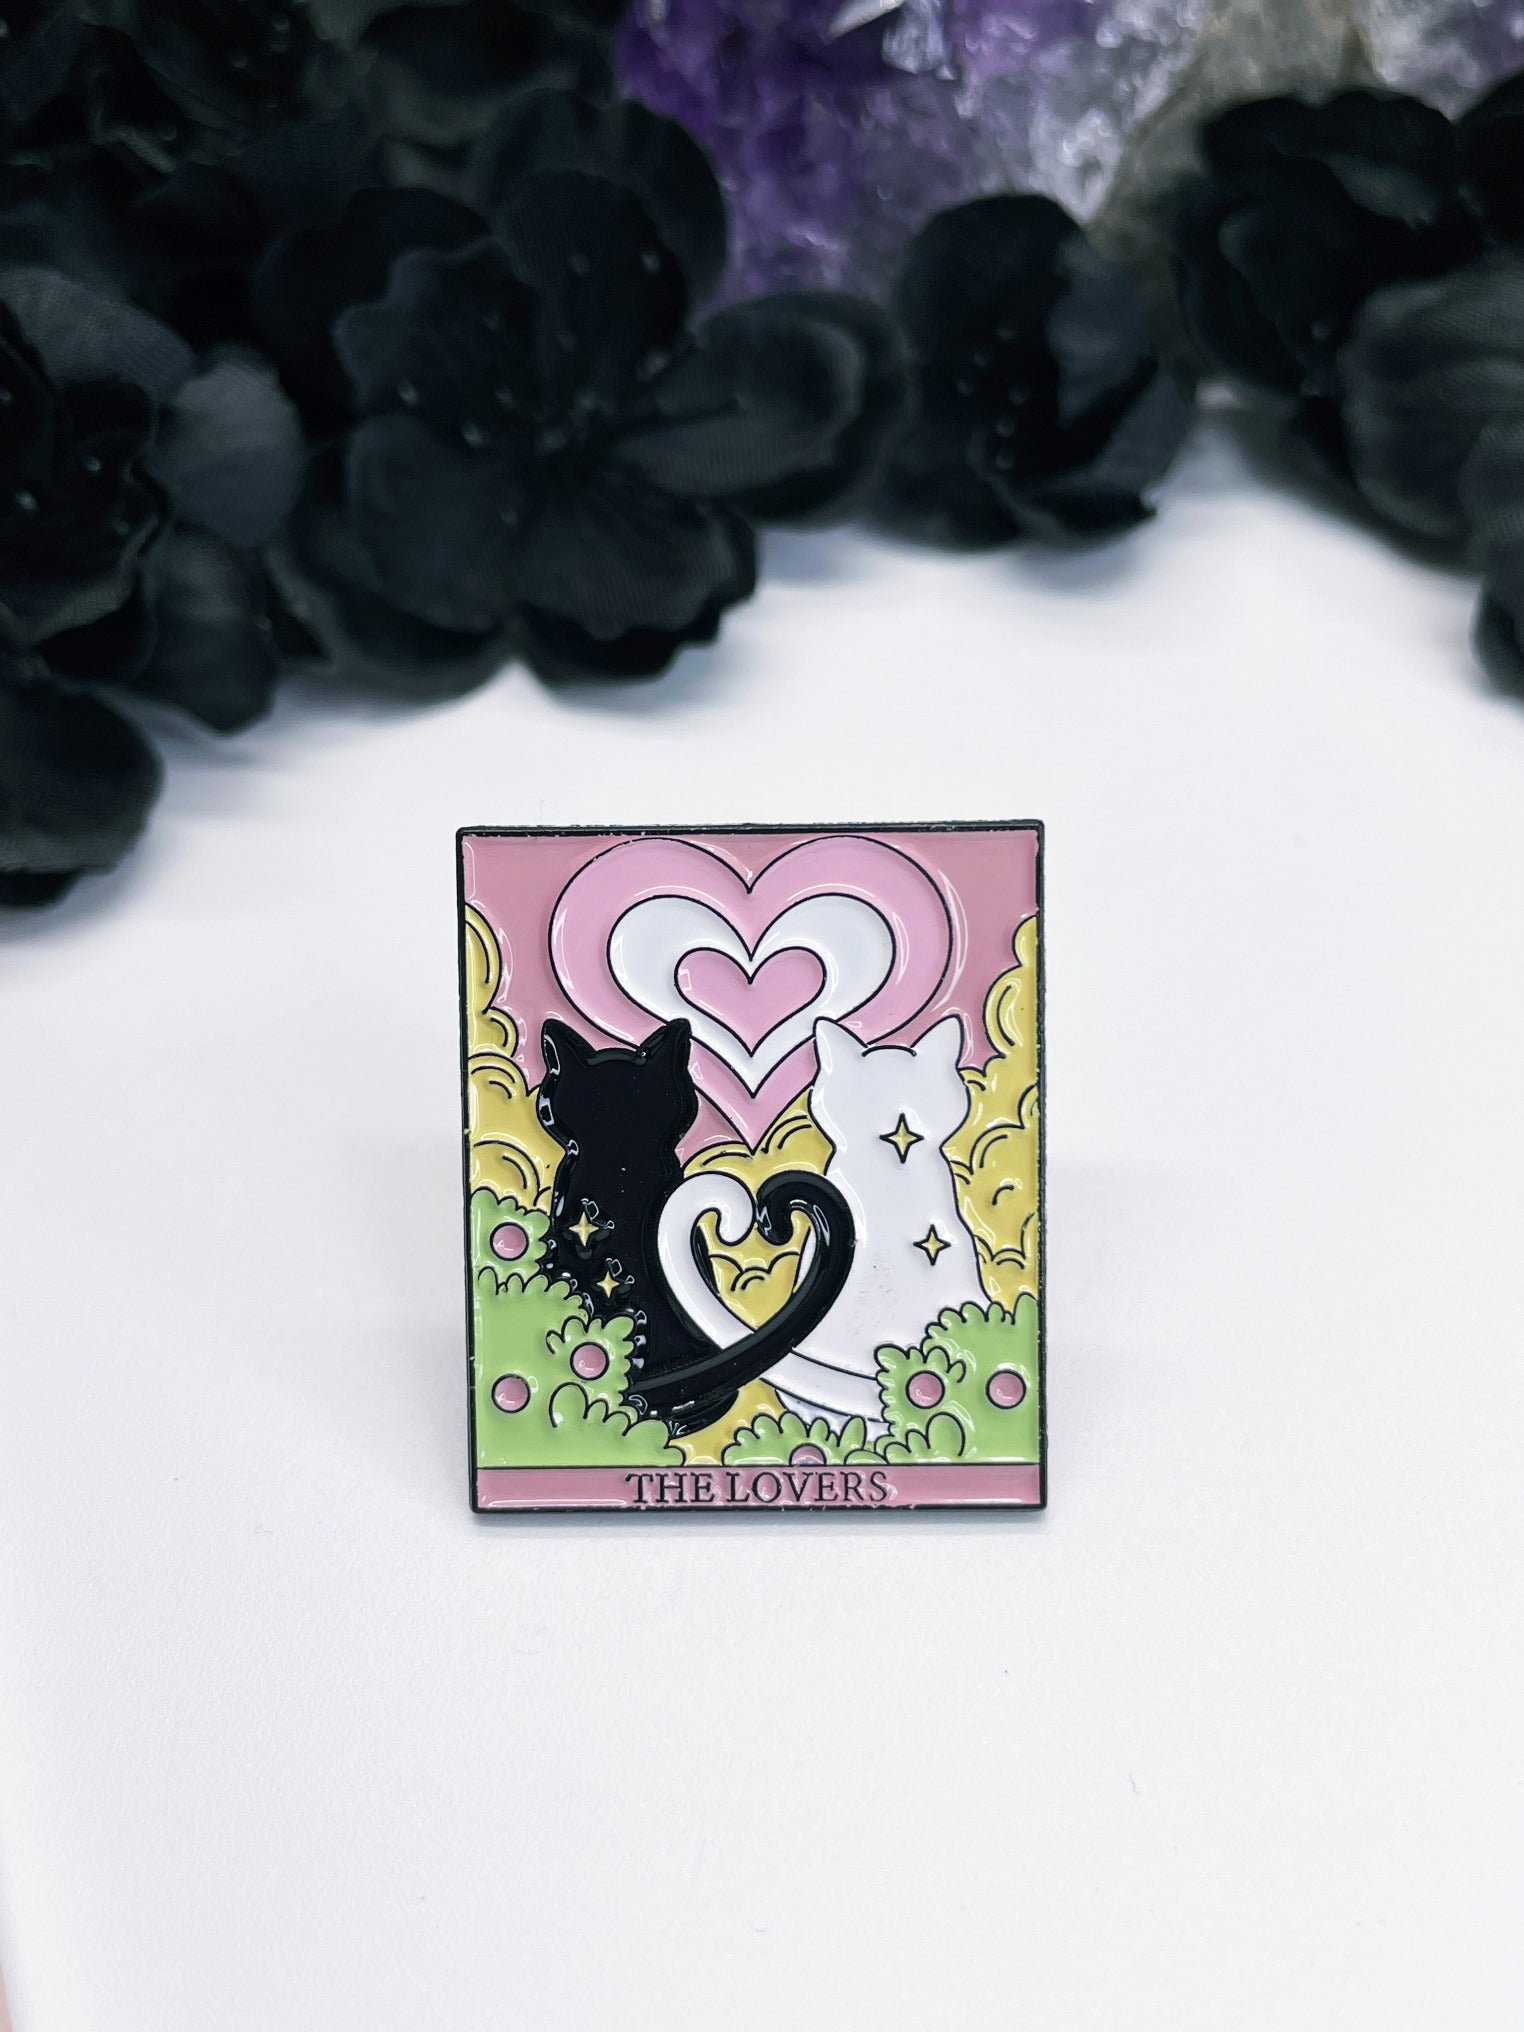  An enamel pin featuring a tarot card with a black cat and a white cat on it, the card is "The Lovers."